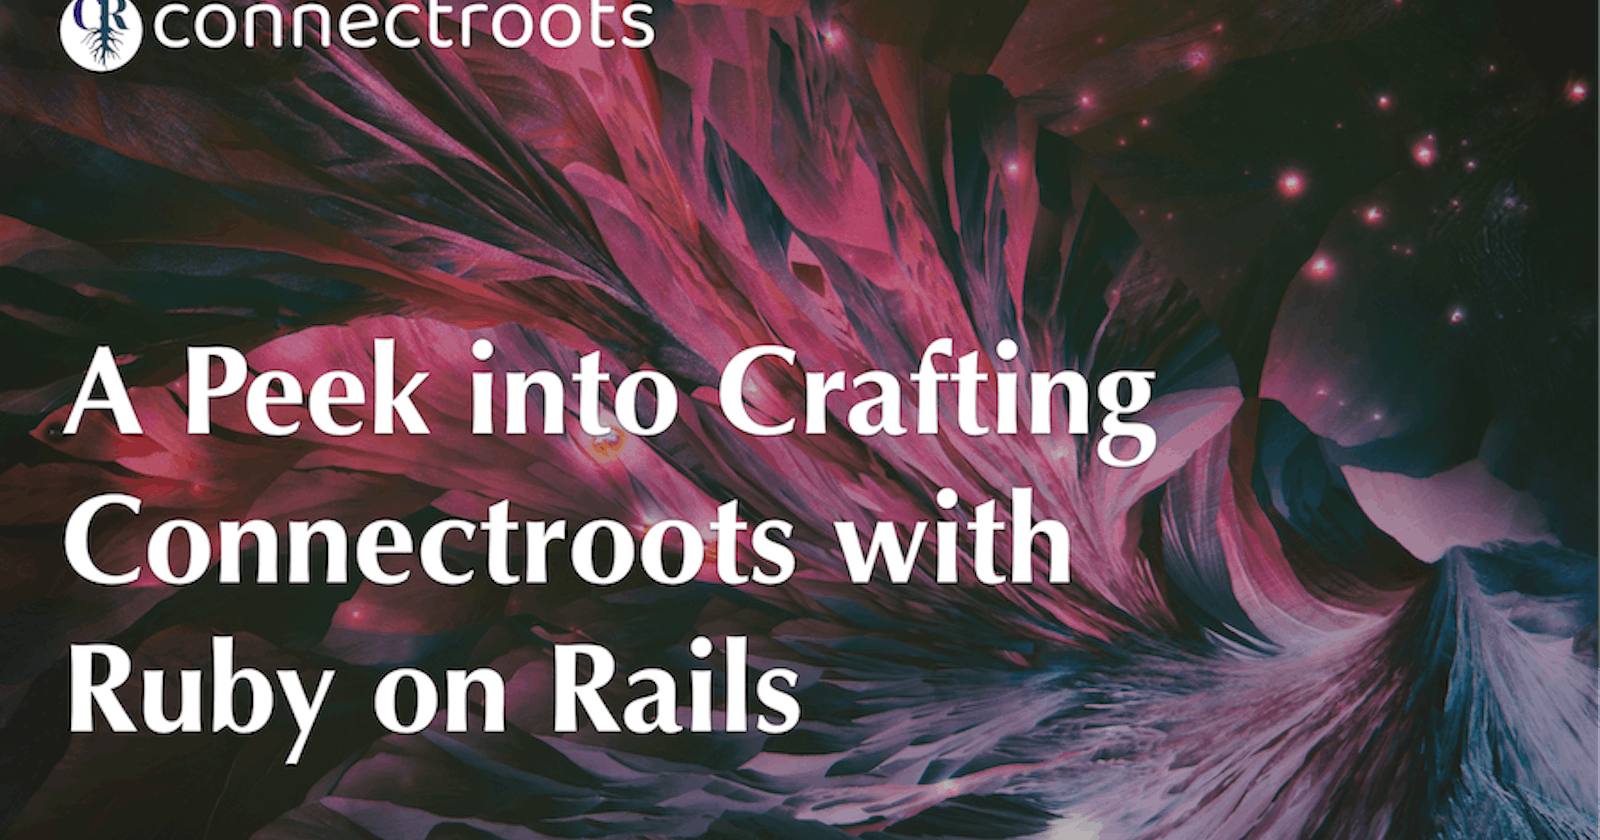 A Peek into Crafting Connectroots with Ruby on Rails